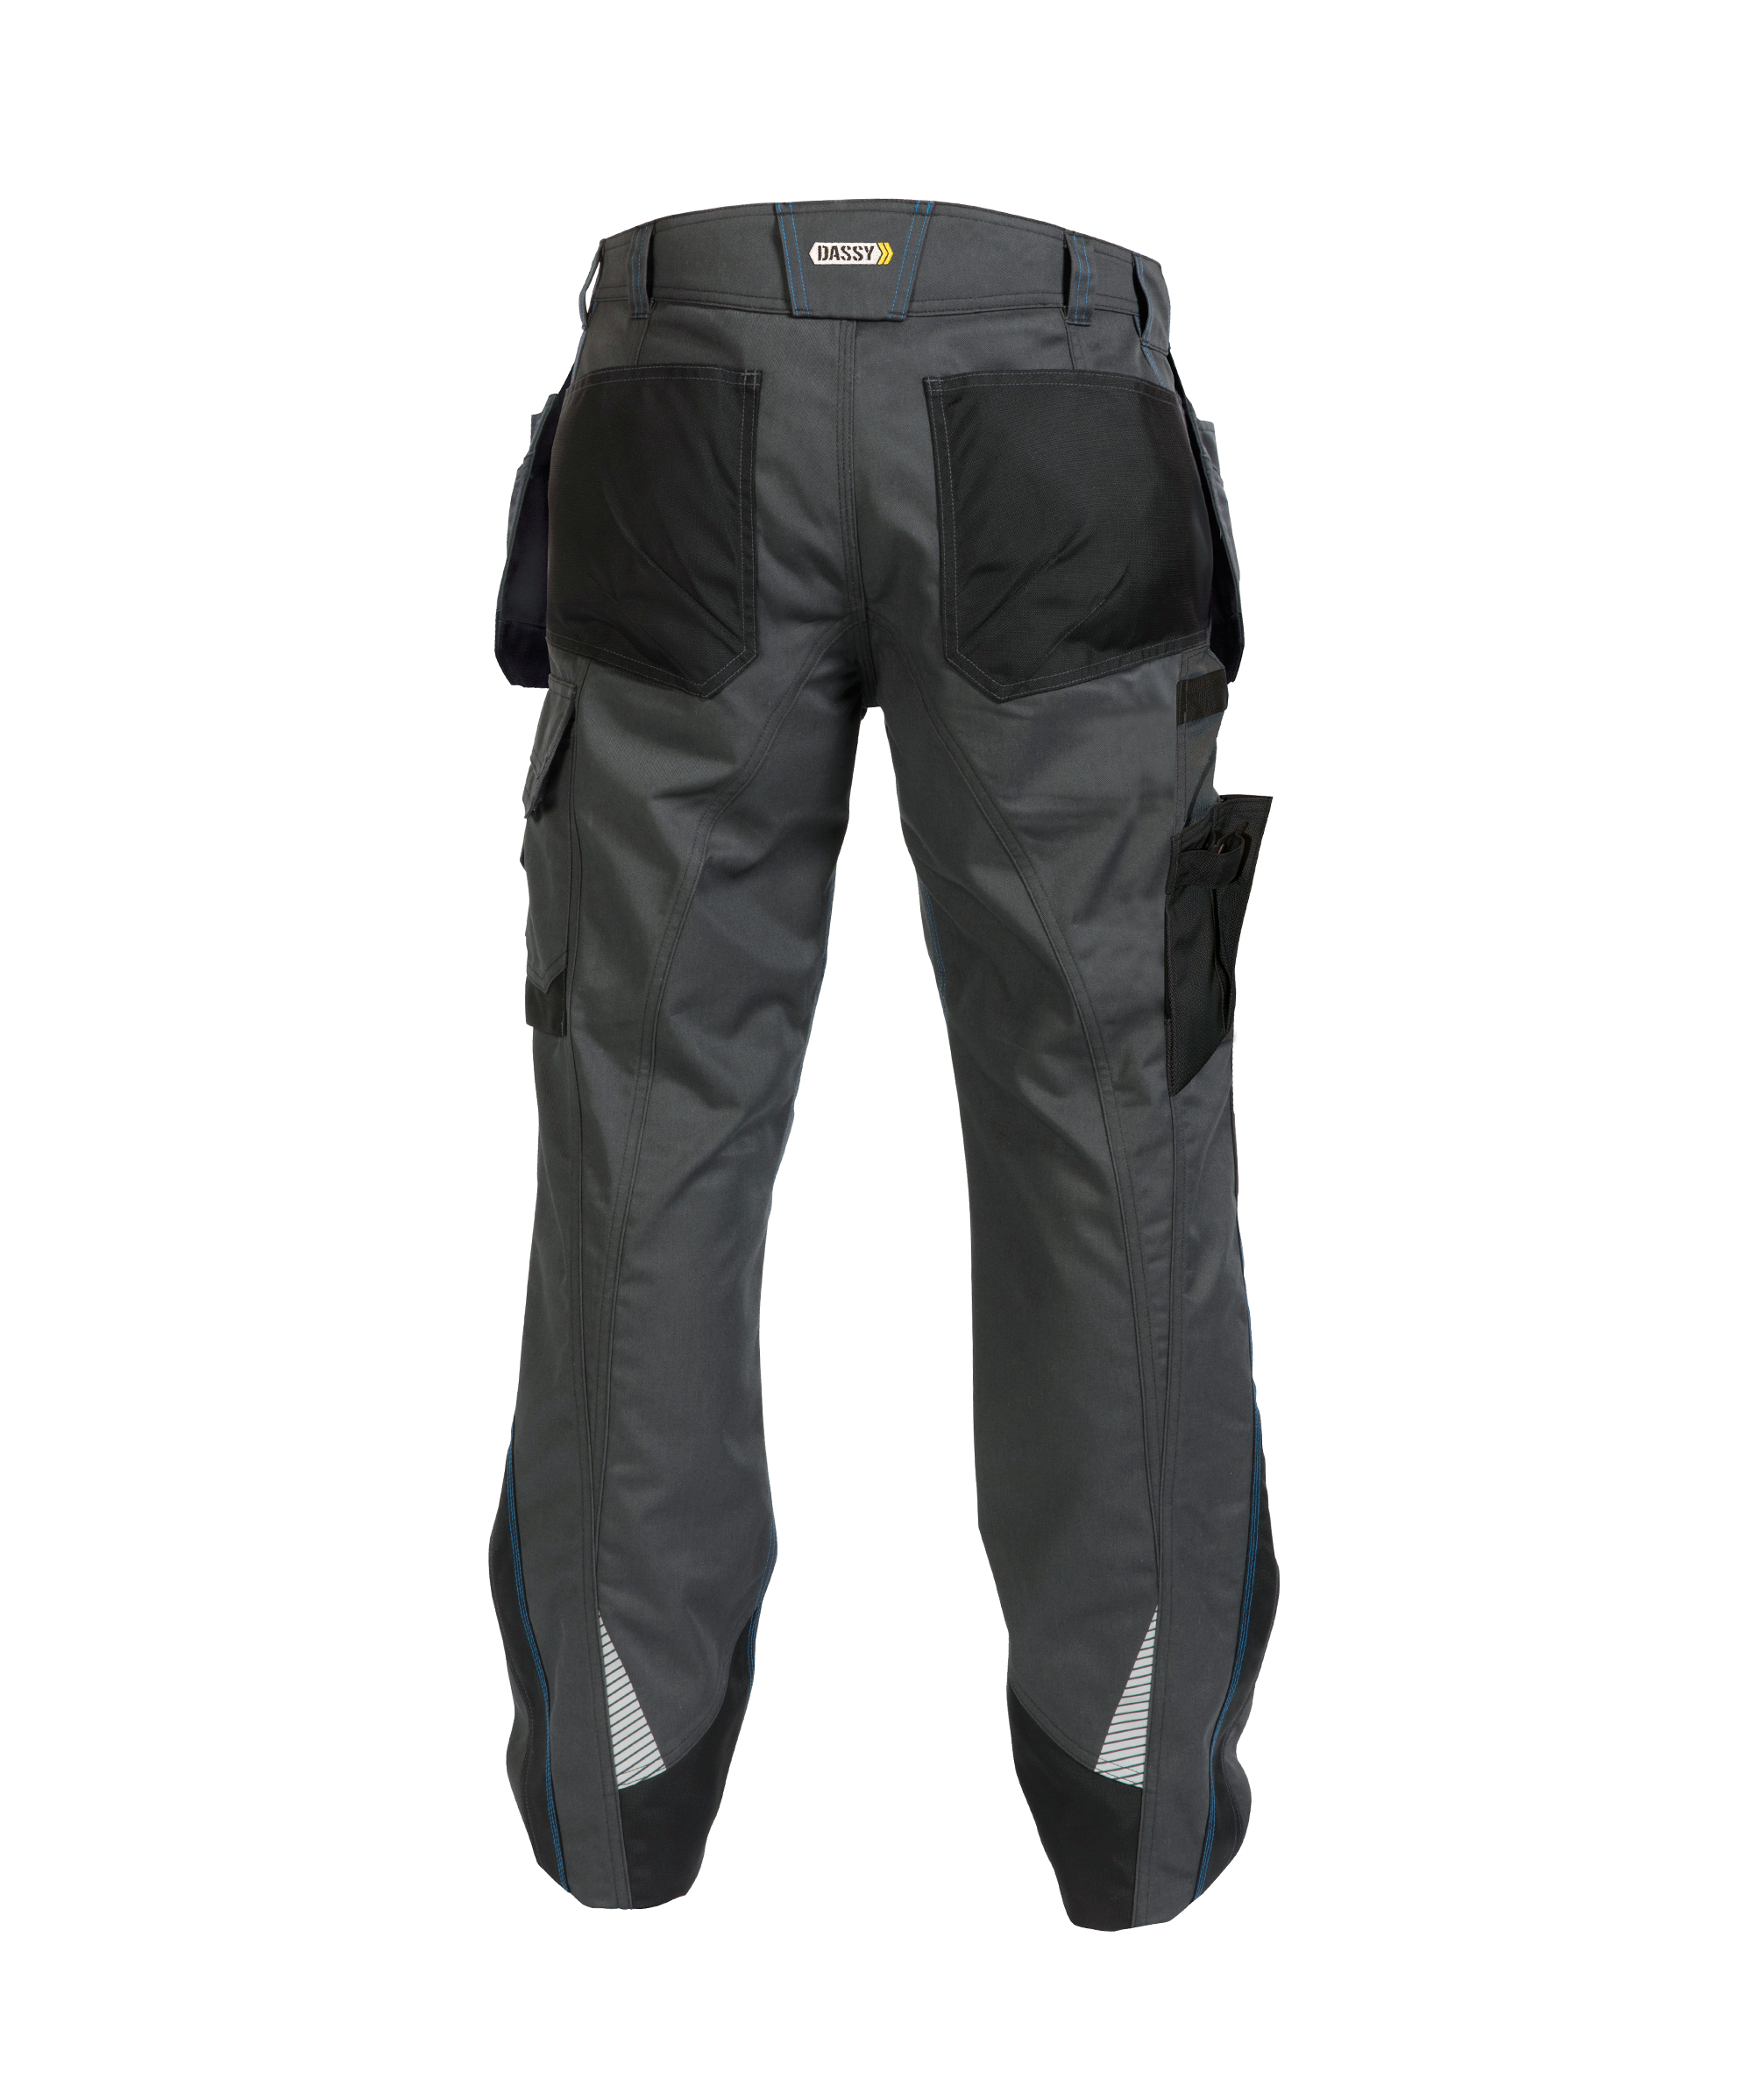 magnetic_two-tone-work-trousers-with-multi-pockets-and-knee-pockets_anthracite-grey-black_back.jpg